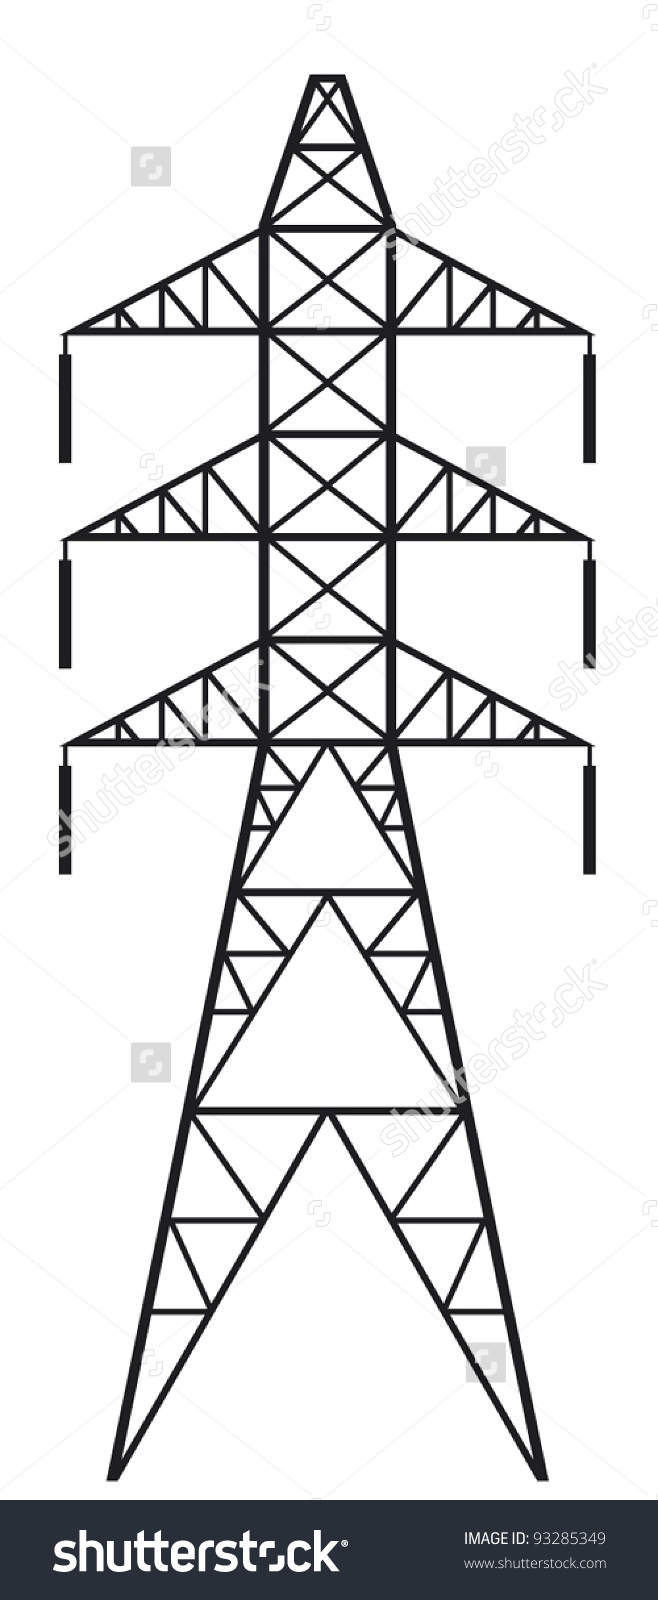 clipart power lines - photo #43